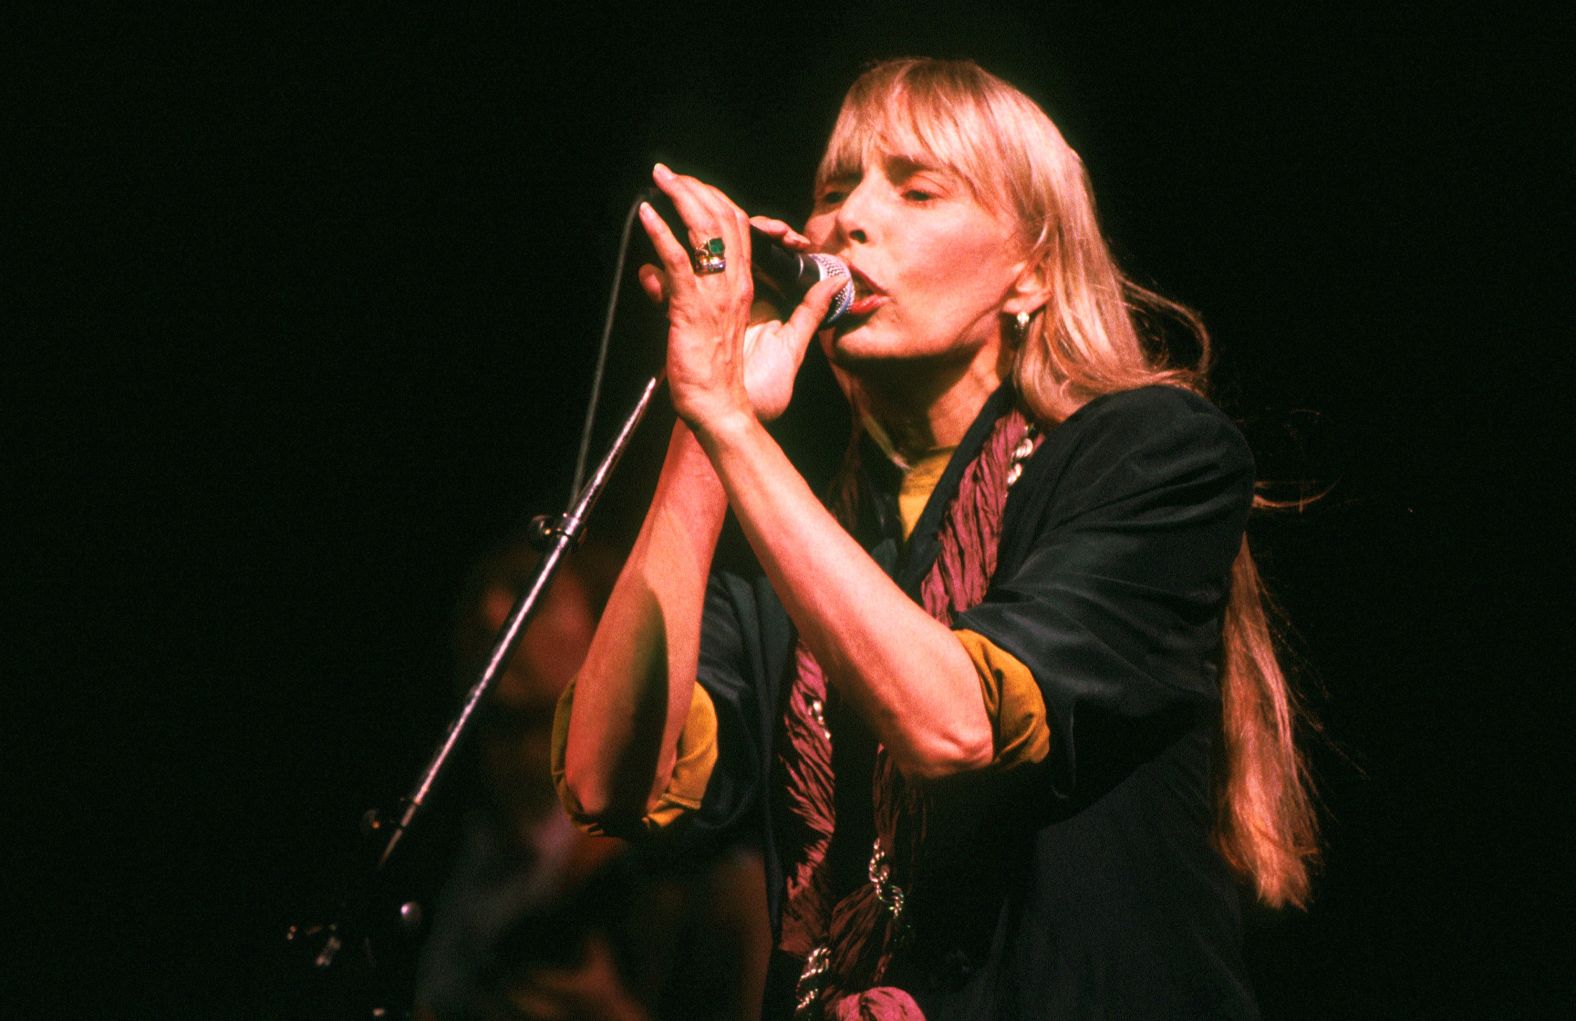 Mitchell performs at The Wall concert in Berlin. The 1990 event was organized by Pink Floyd's Roger Waters at the site where the Berlin Wall was torn down the year before.